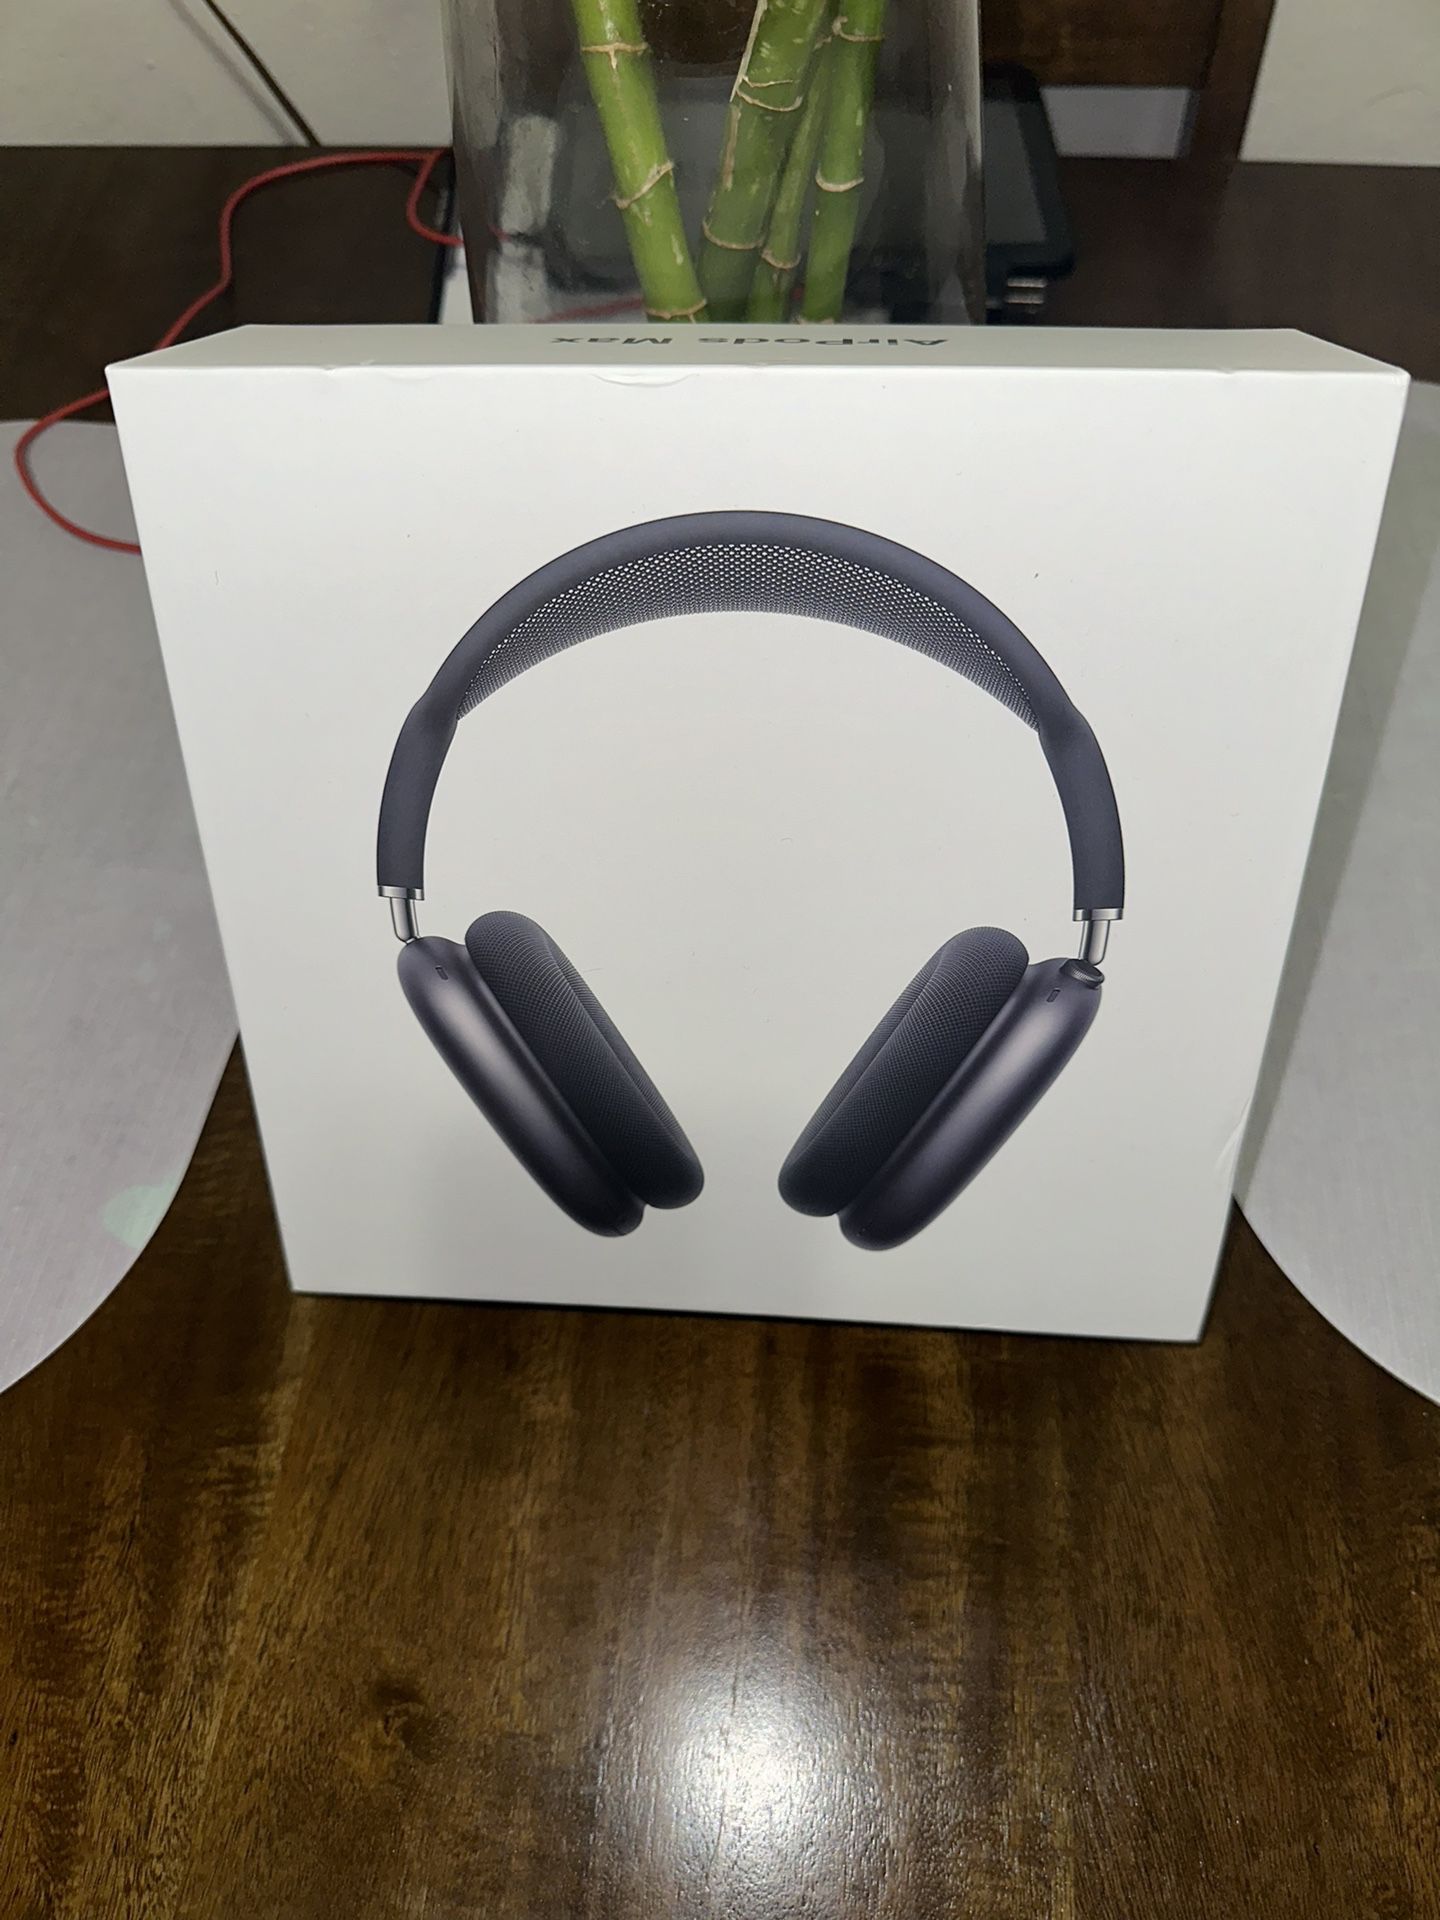 Brand new headphones not used only took out for pictures 